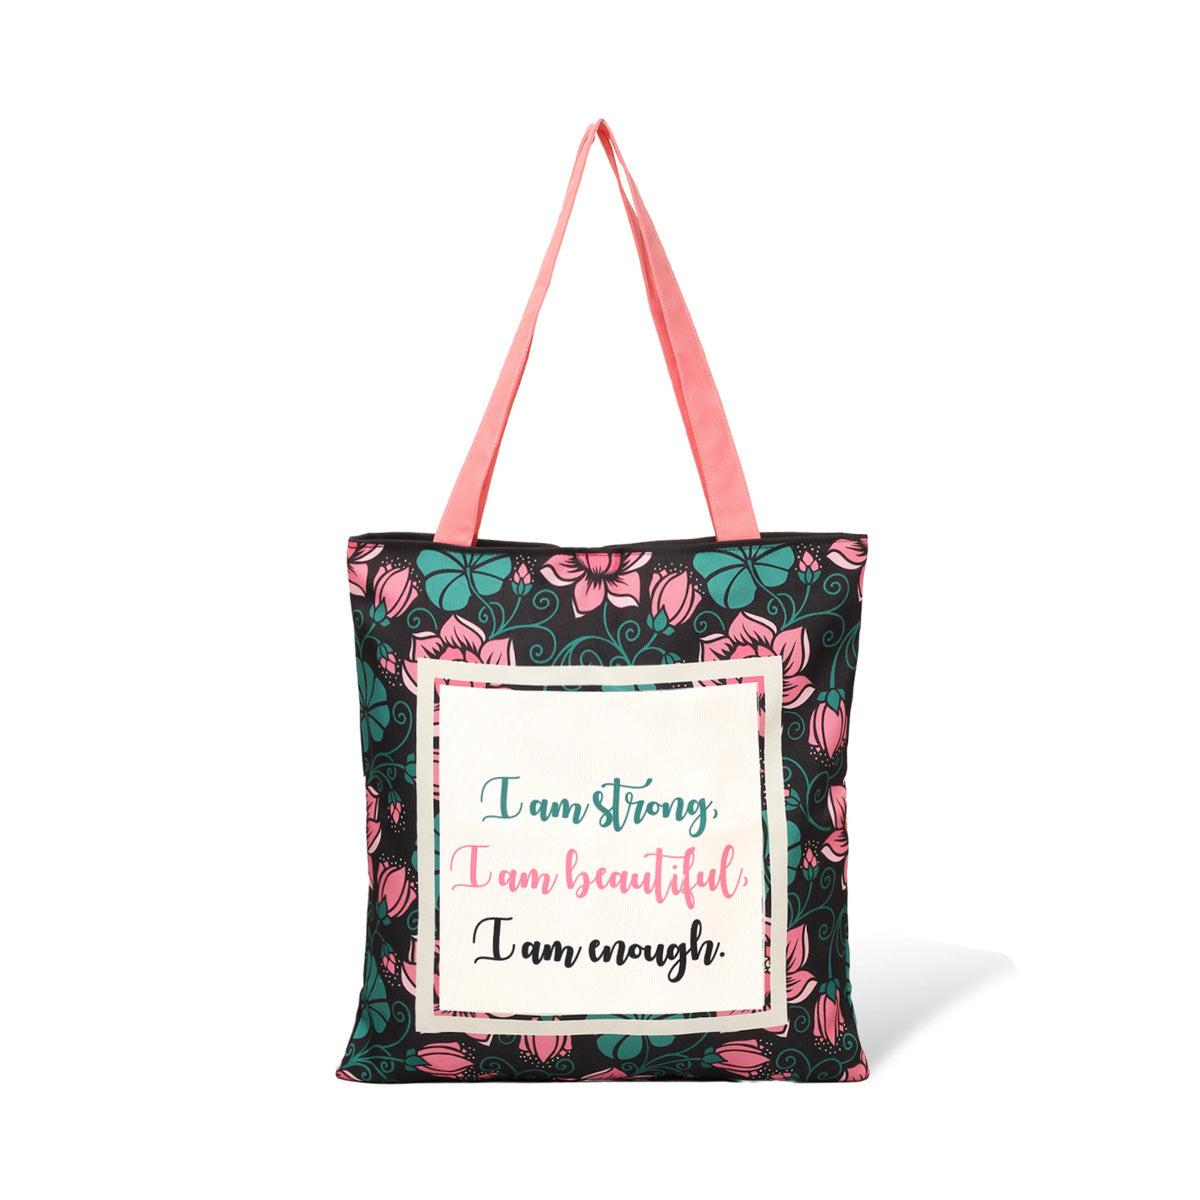 A tote bag with the quote "I am strong, I am beautiful, I am strong" on it.